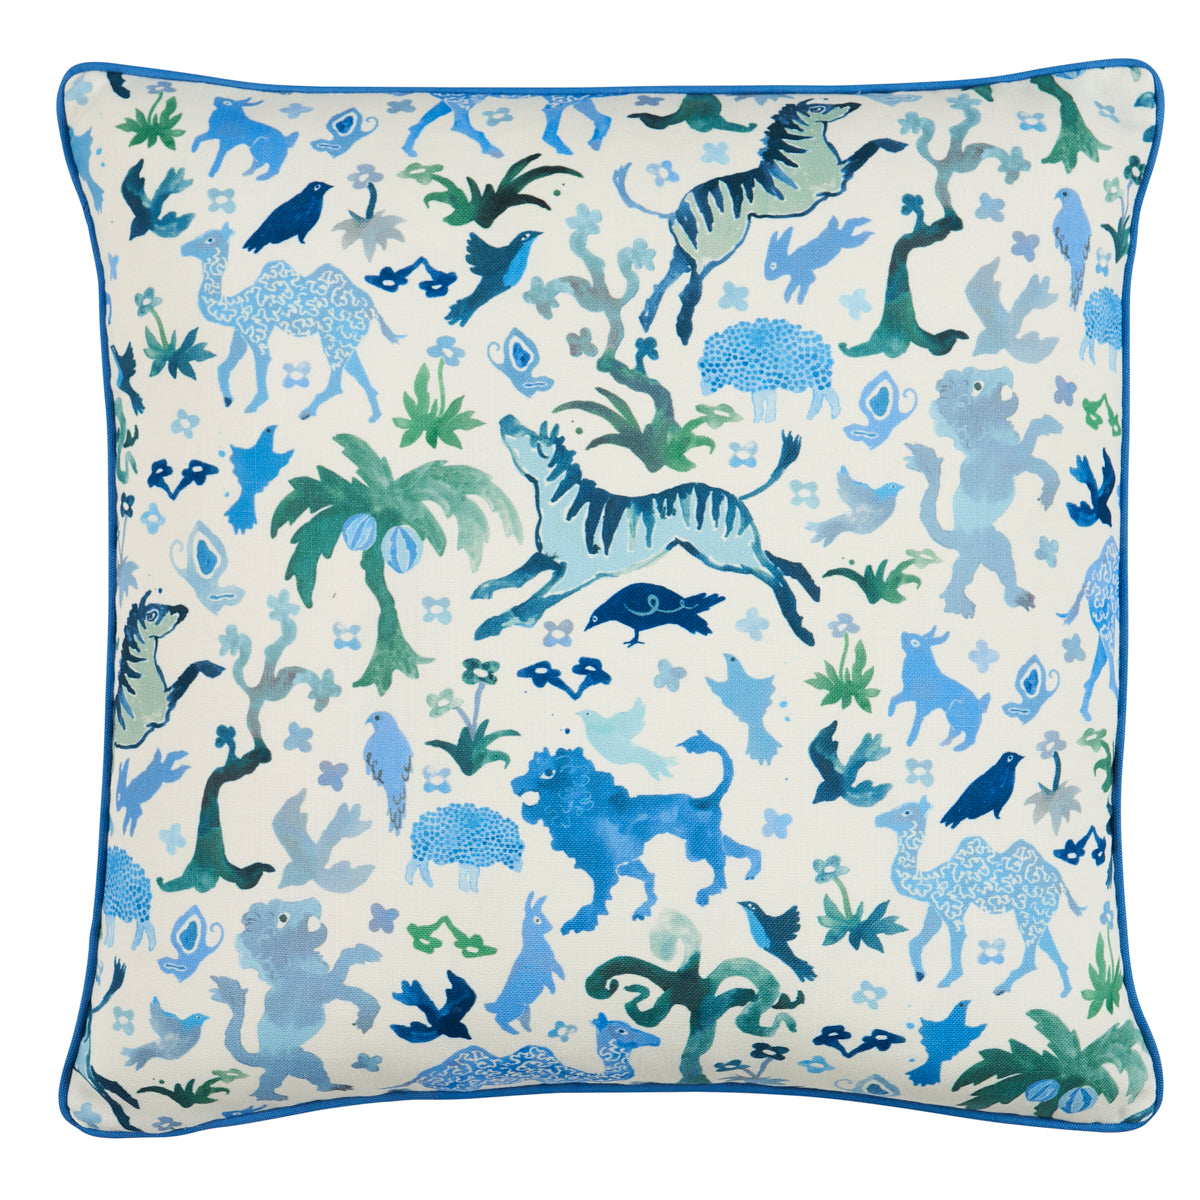 Beasts Pillow | Blue and Green